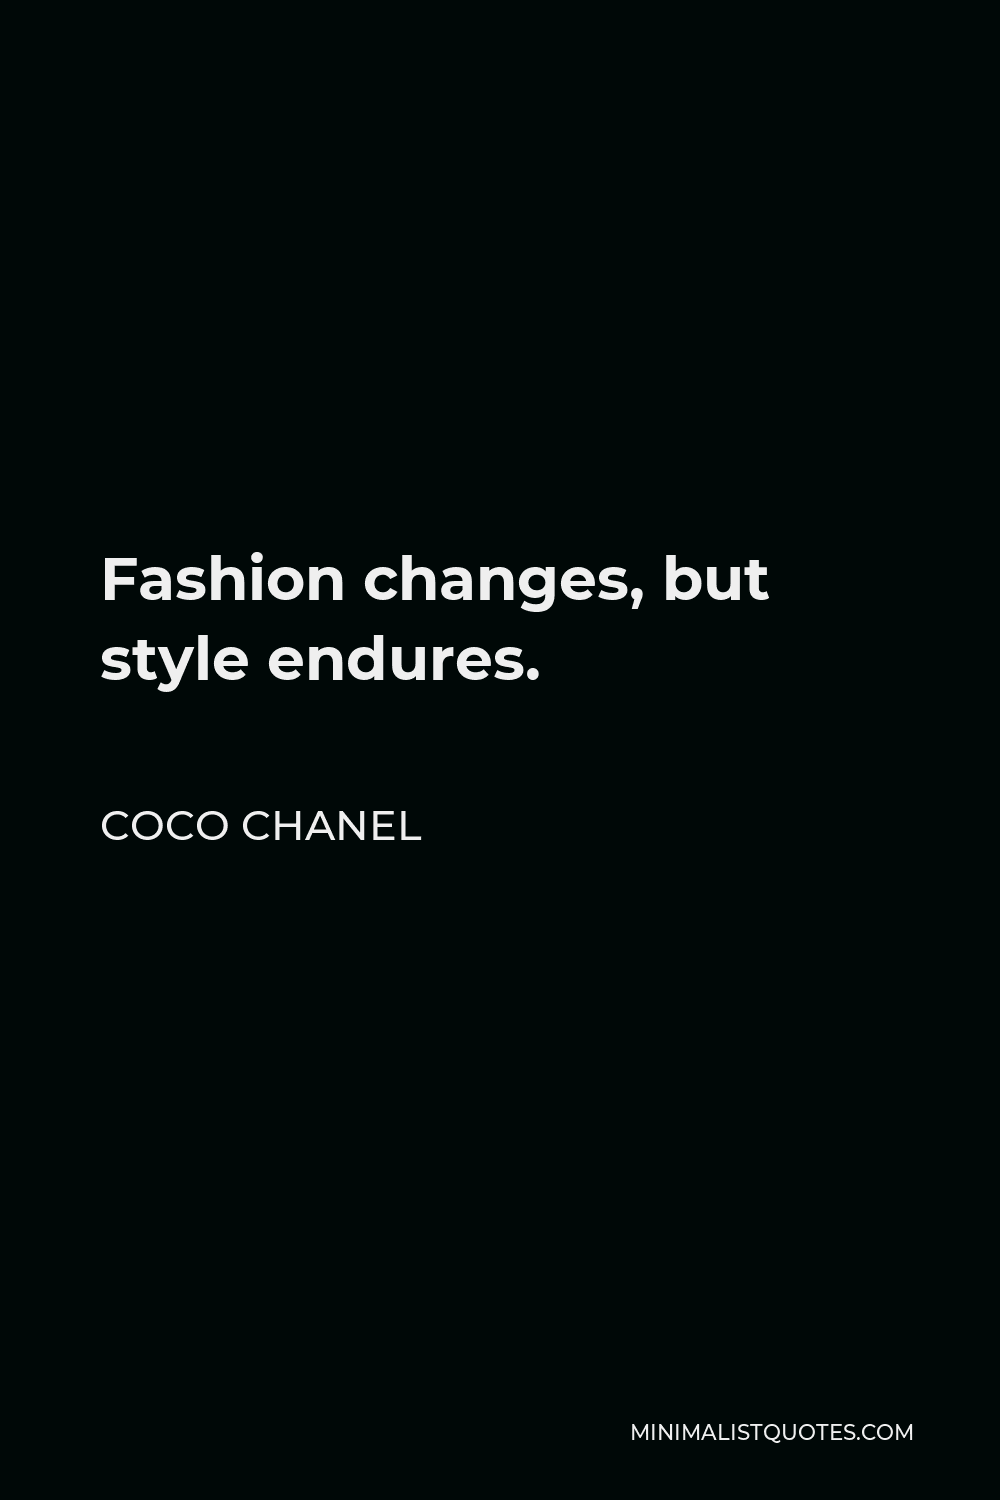 coco chanel style